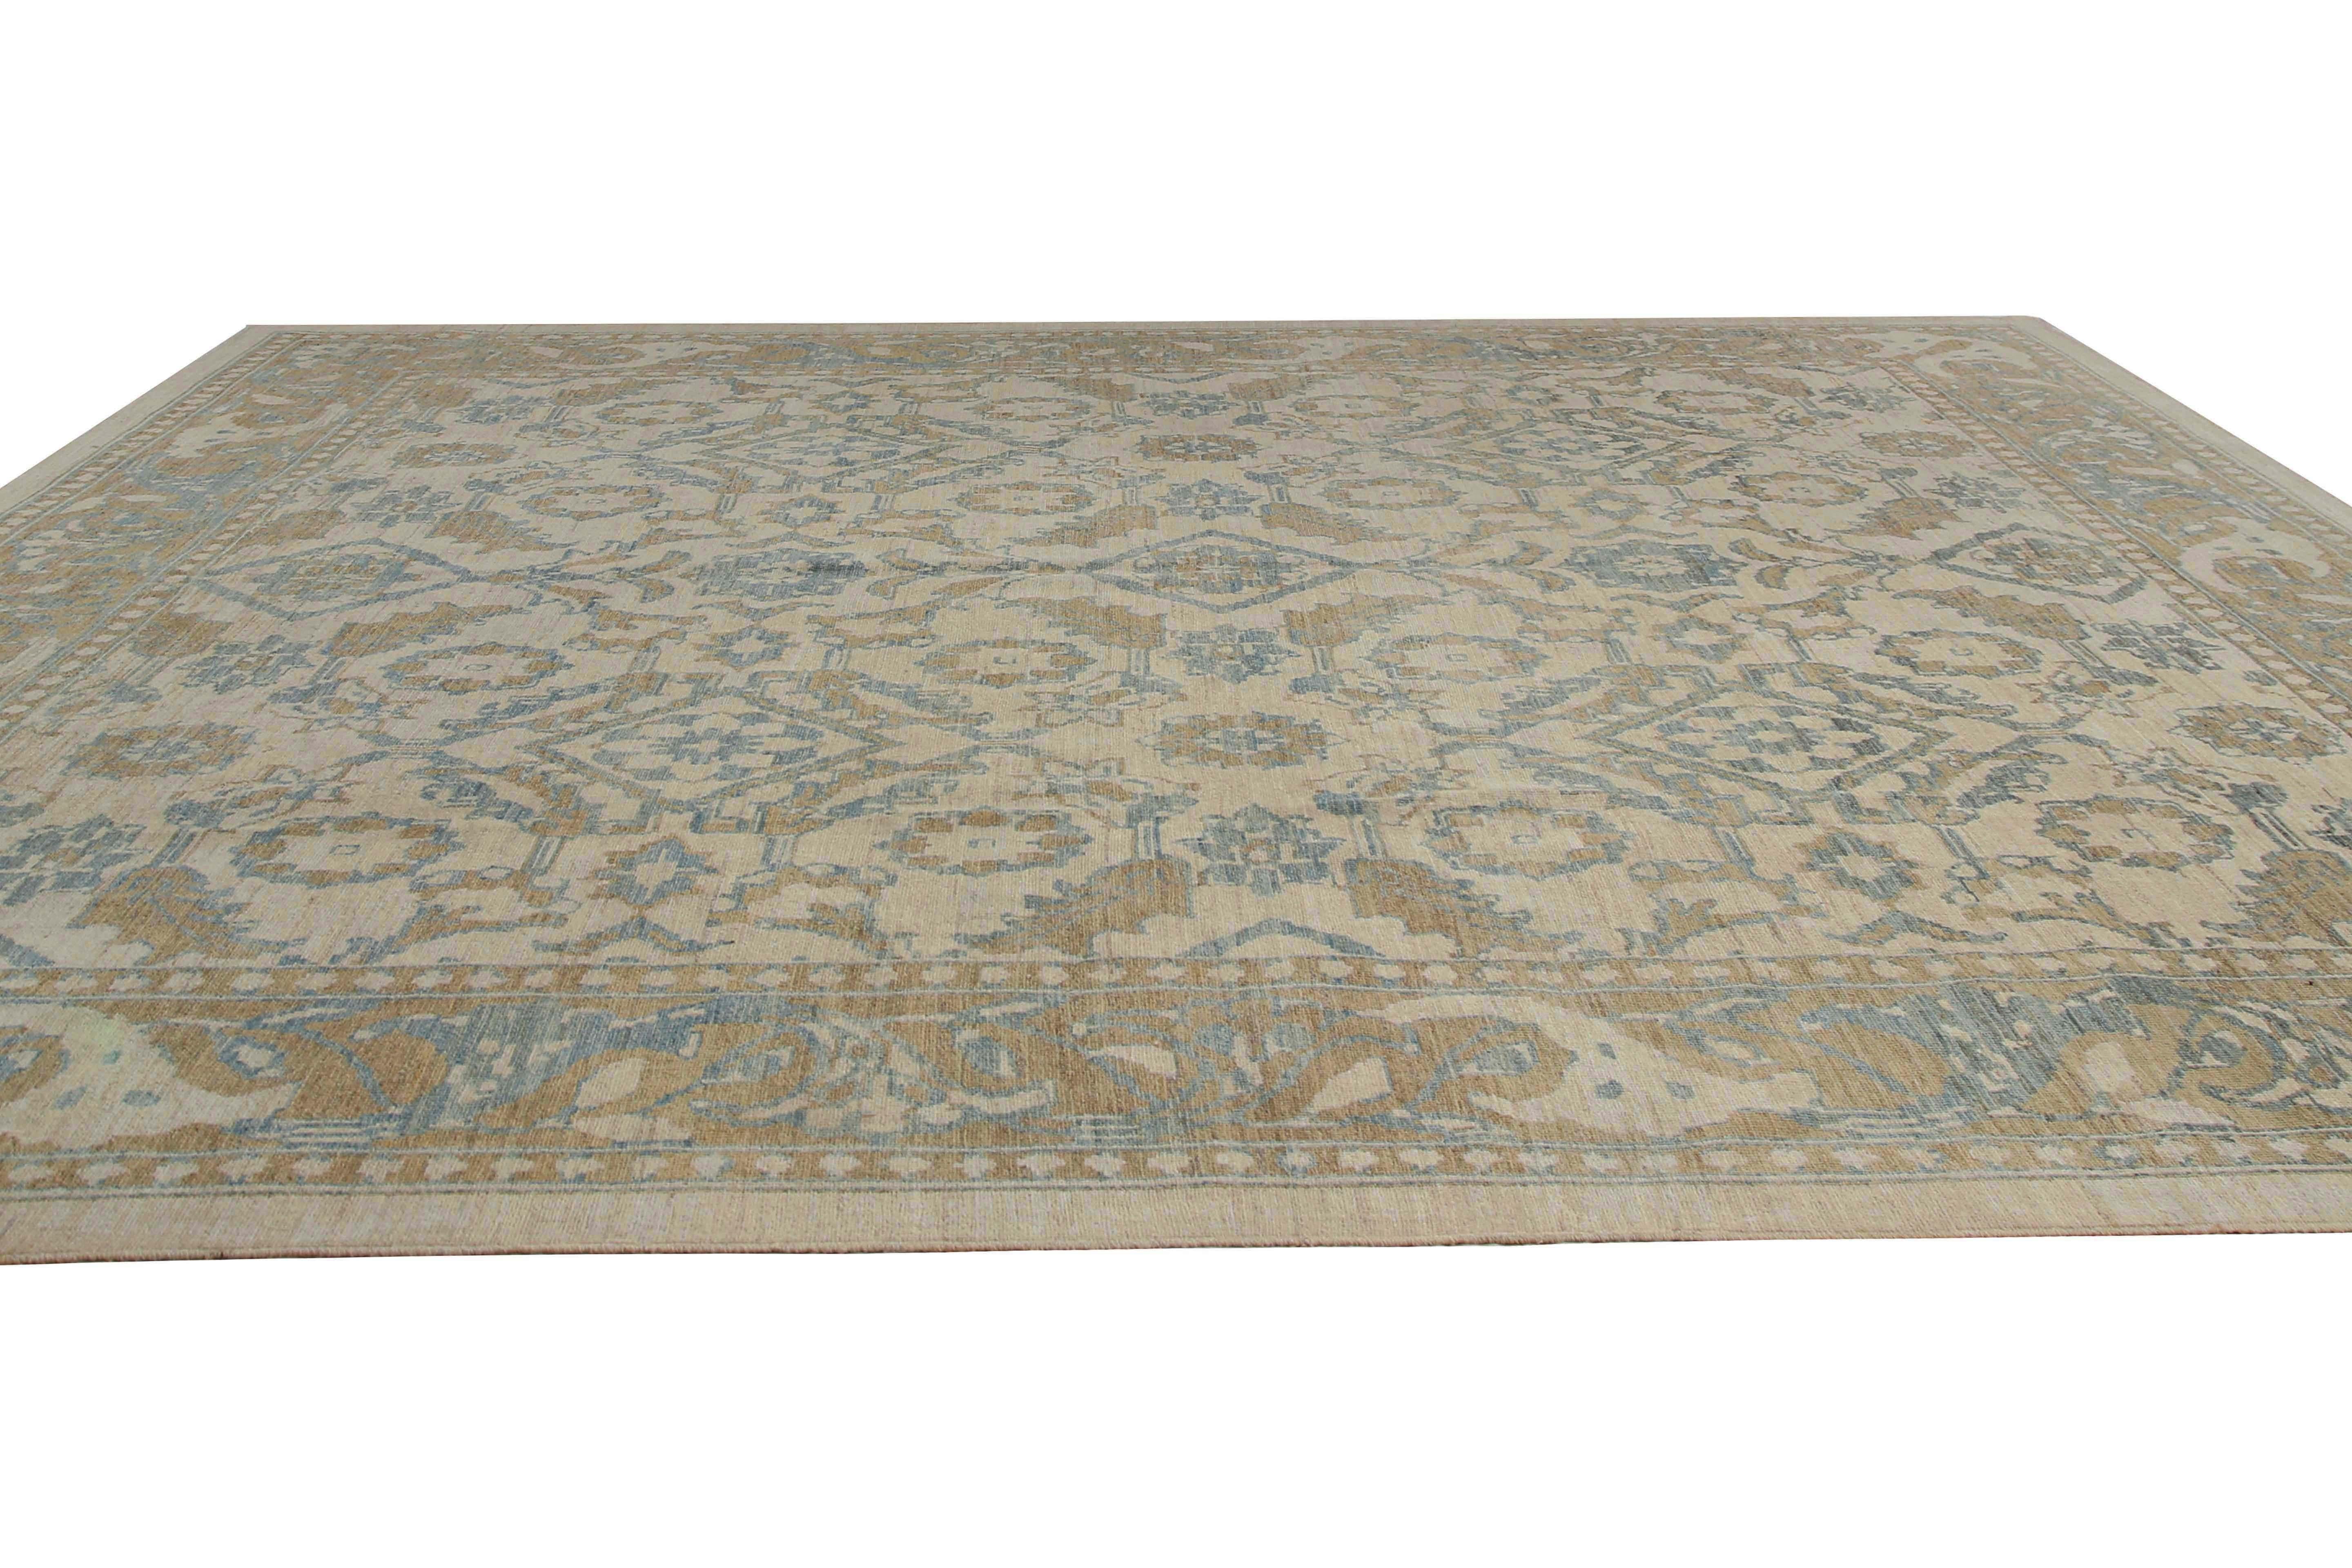 Luxurious Handmade Sultanabad Rug - Transitional Design, Blue, Green, and Yellow For Sale 1